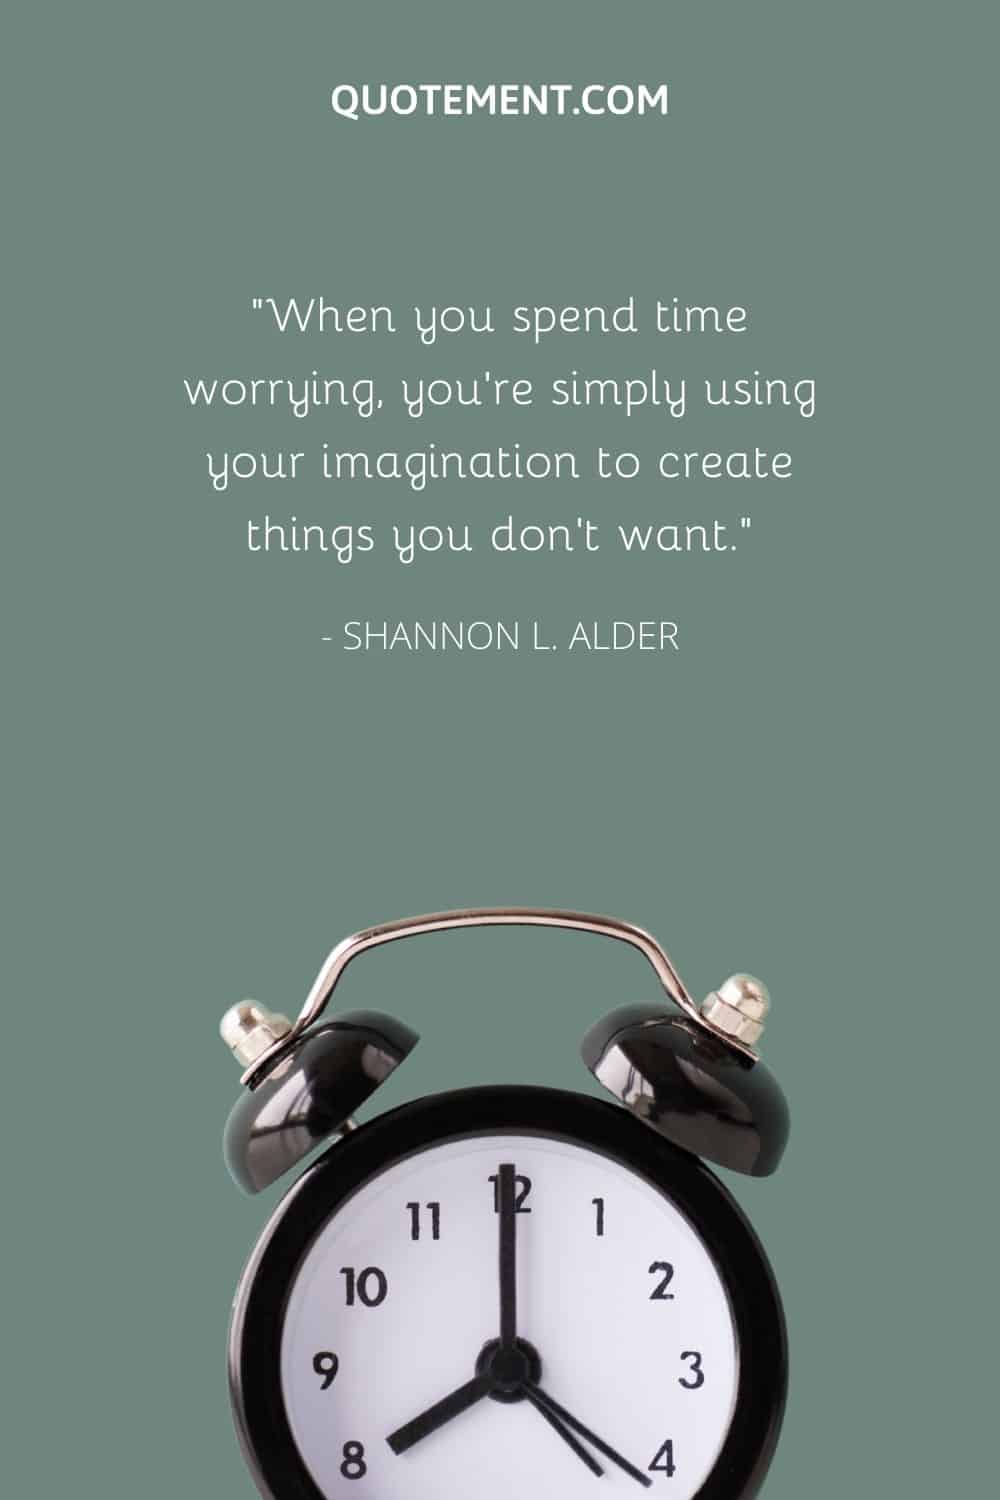 When you spend time worrying, you’re simply using your imagination to create things you don’t want.